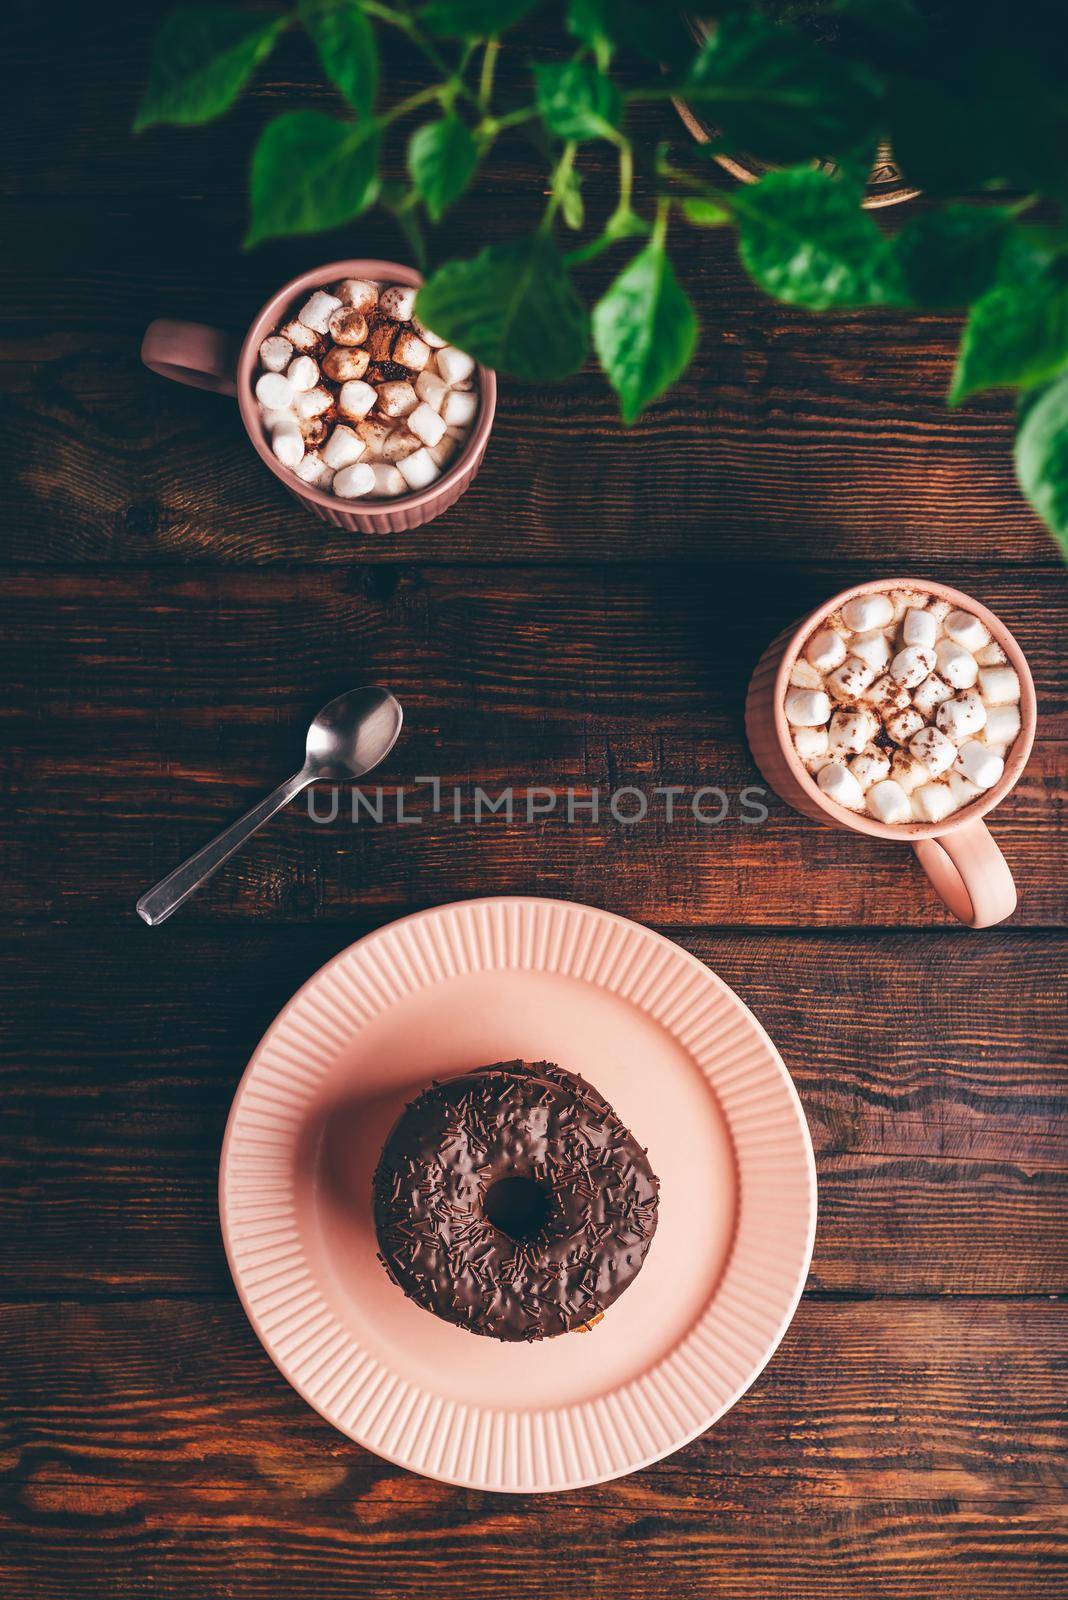 Stack of Chocolate Donuts and Hot Chocolate with Marshmallow by Seva_blsv